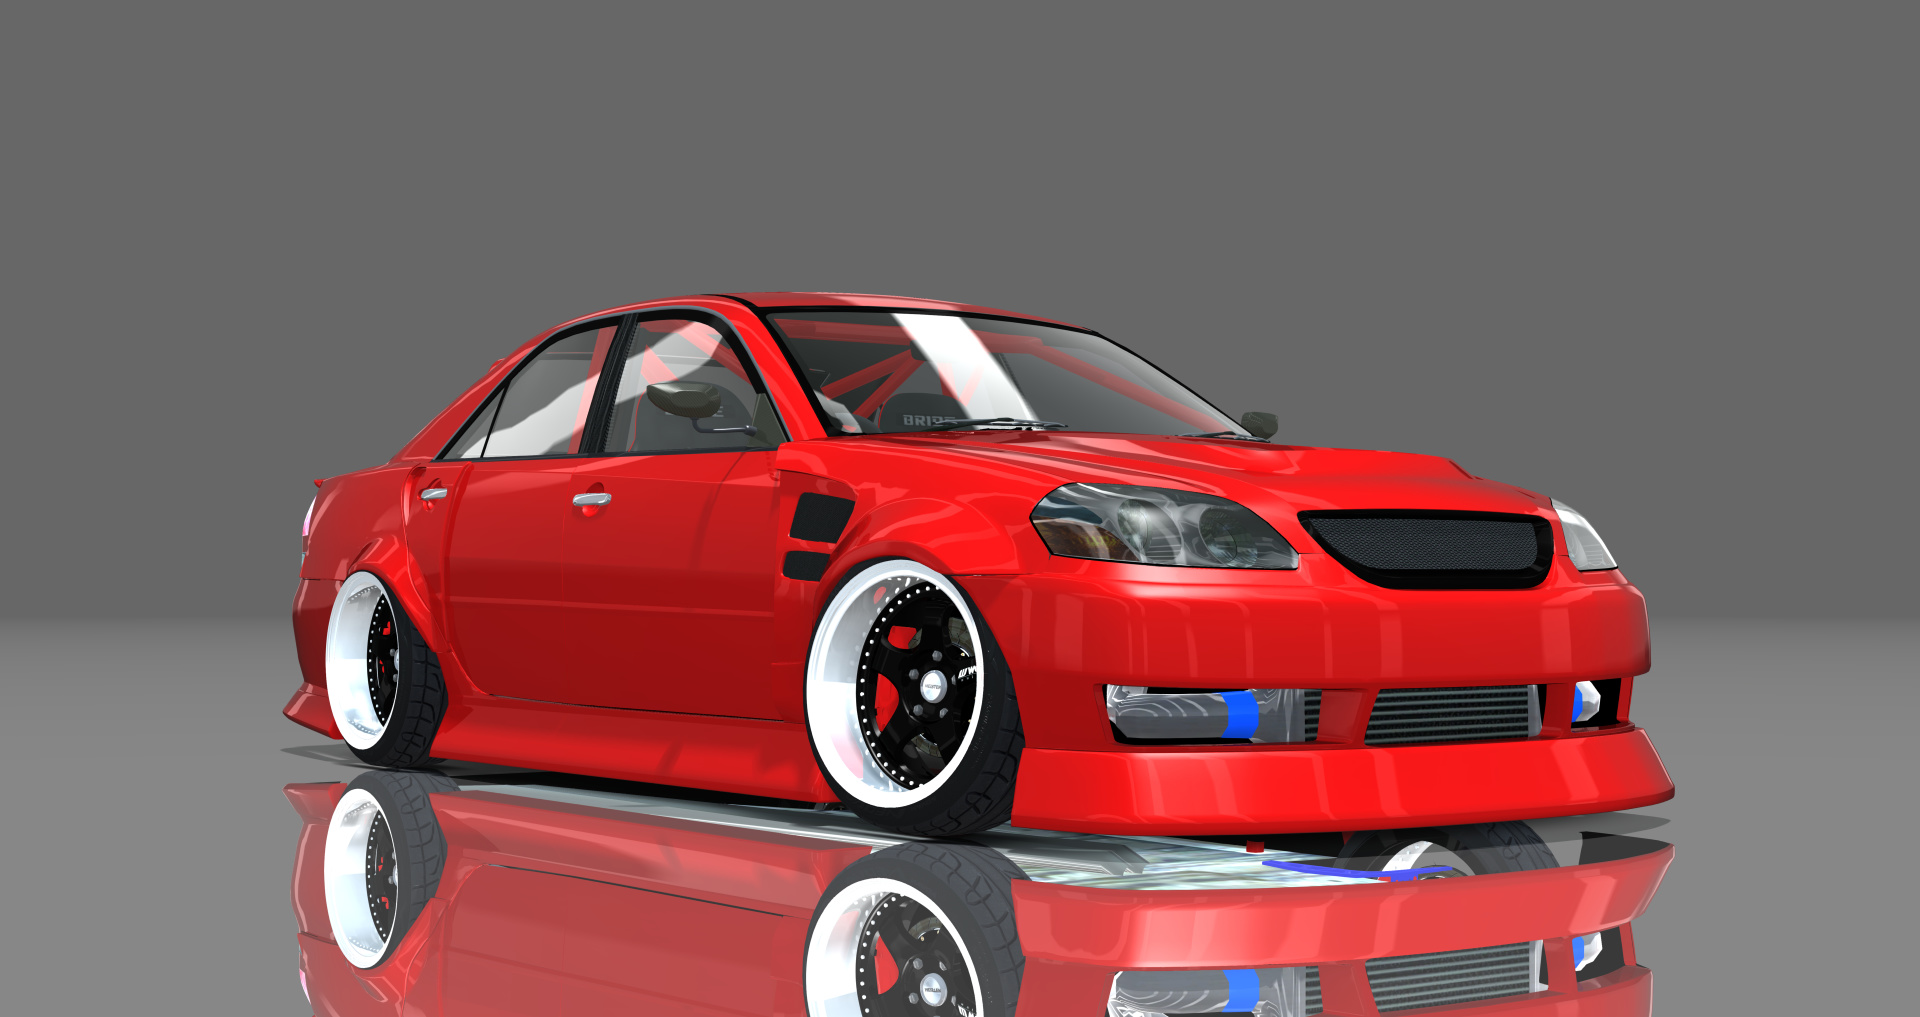 DTP Toyota JZX110 Mark2, skin red